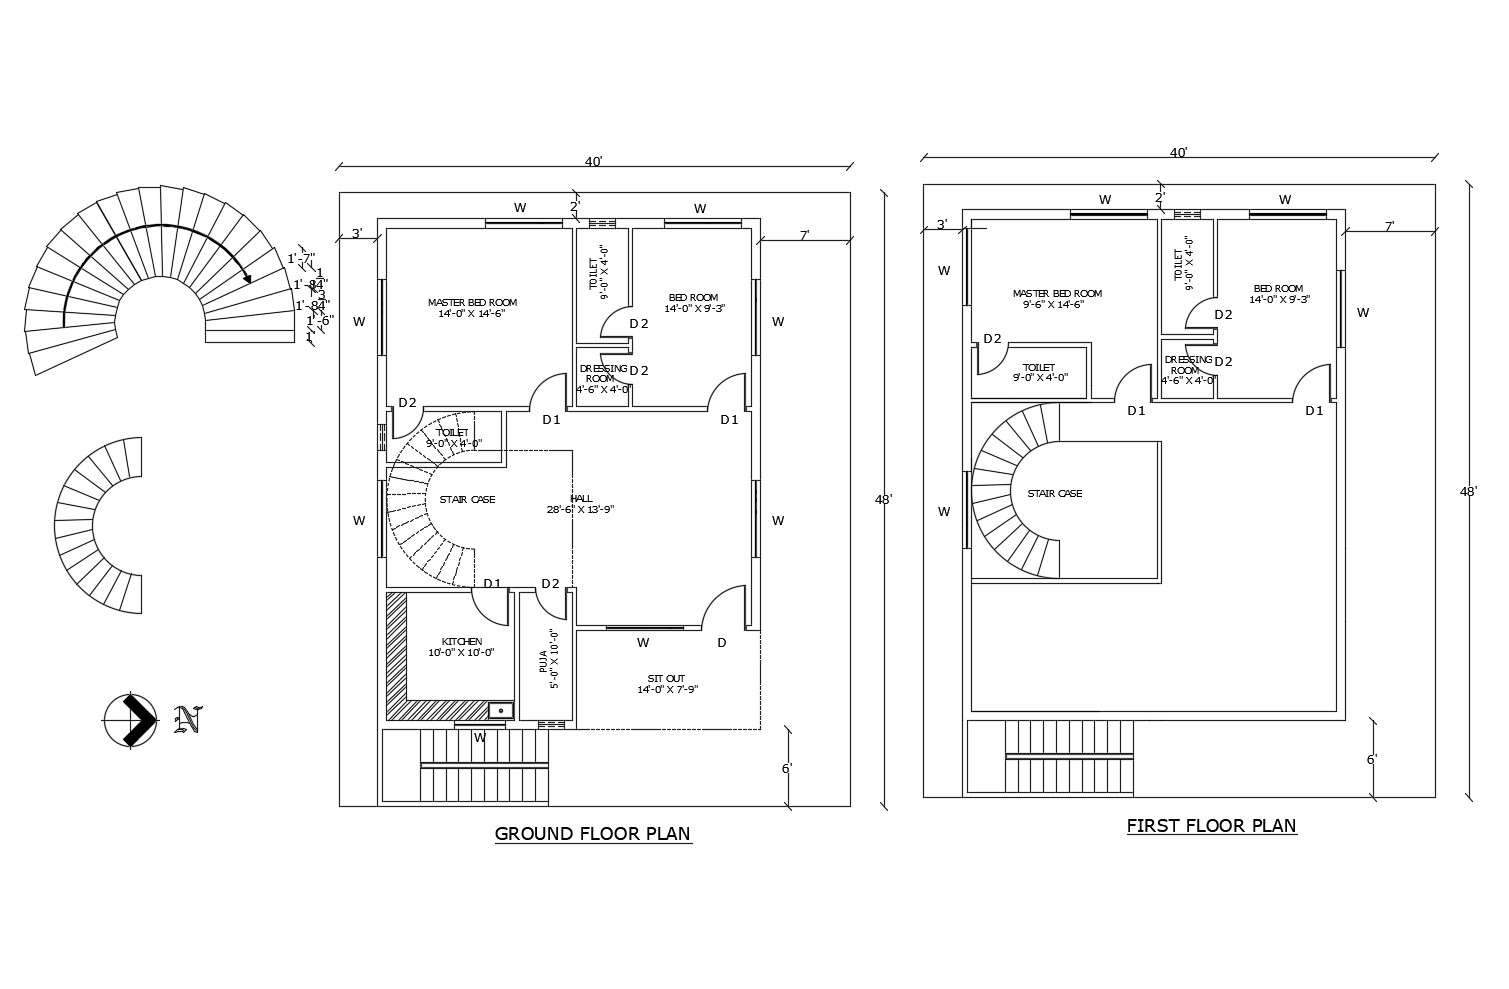 Floor plan of residential house 40' x 48' with detail dimension in